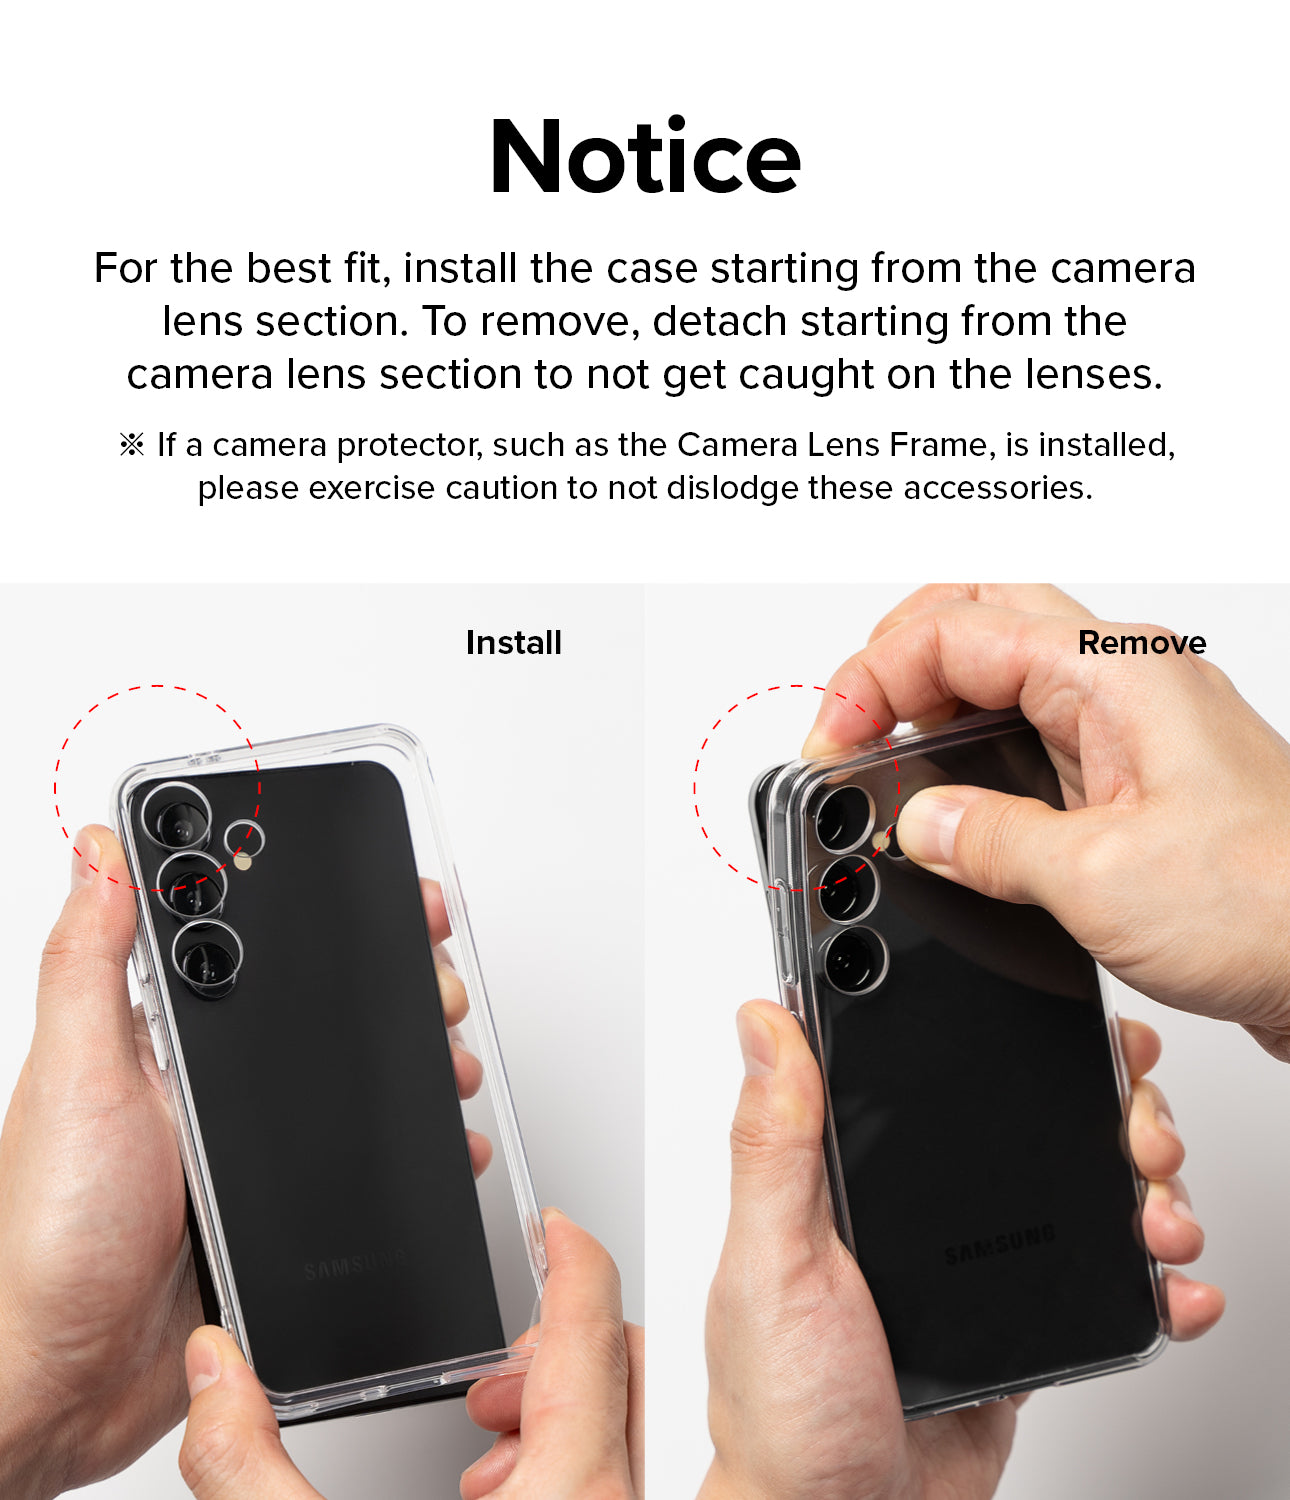 Galaxy A55 Case | Fusion - Notice. For the best fit, install the case starting from the camera lens section. To remove, detach starting from the camera lens section to not get caught on the lenses.